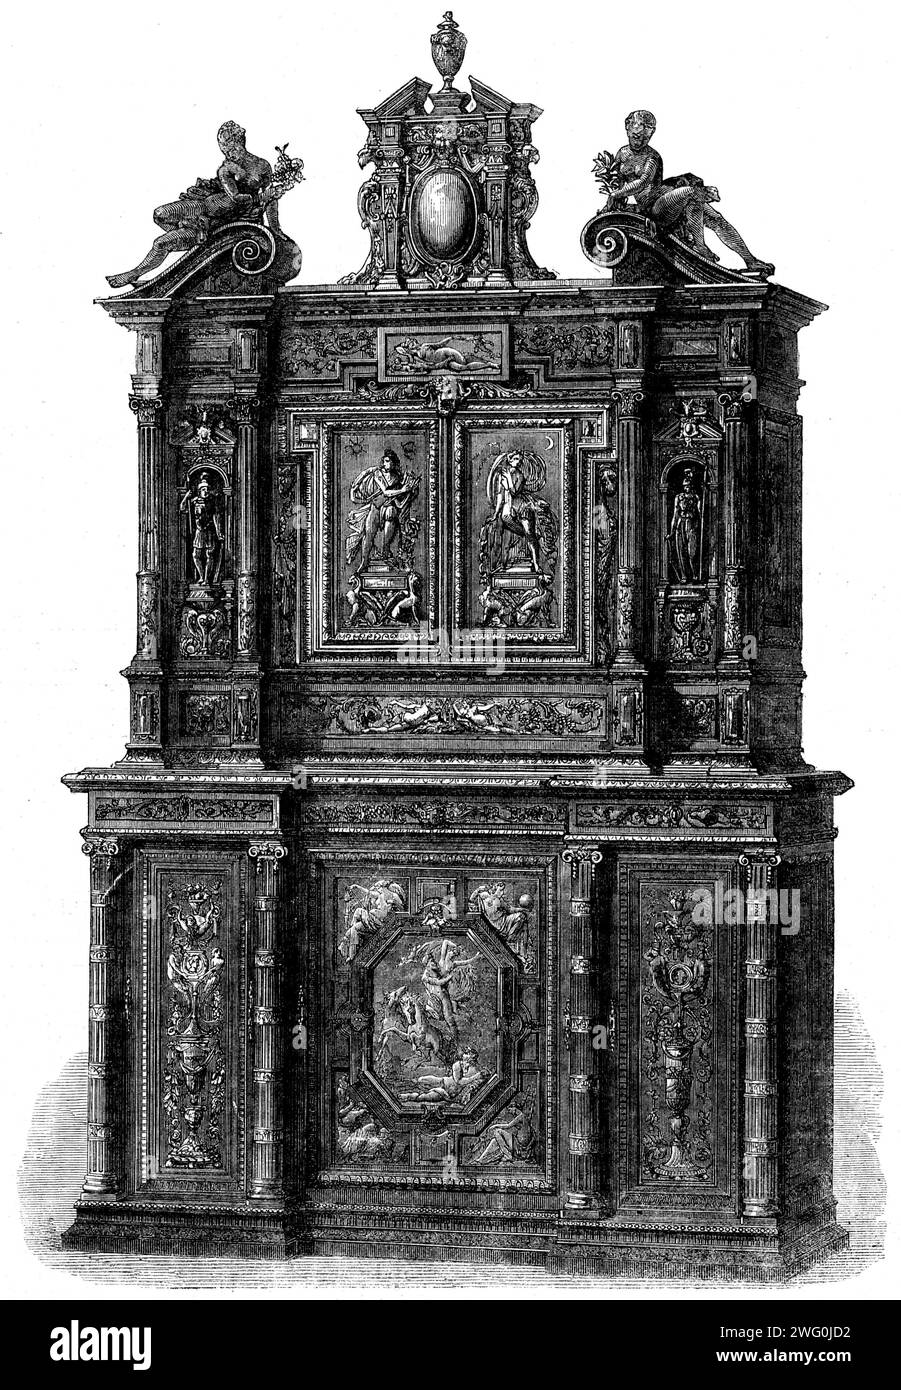 The International Exhibition - carved ivory [sic] cabinet, by H. Fourdinois, 1862. Piece of furniture made of ebony, '...richly carved in the Renaissance style, the lower portion being divided into three sections by four columns of a somewhat Corinthian character. The central portion is panelled, and has carved upon it in low relief...the Abduction of Proserpine; and this is surrounded by four comer panels, in which are represented Painting, Sculpture, Science, and Literature. The upper portion...has a pair of doors, one of which has Apollo as Morning, and the other Diana as Evening...Immediat Stock Photo